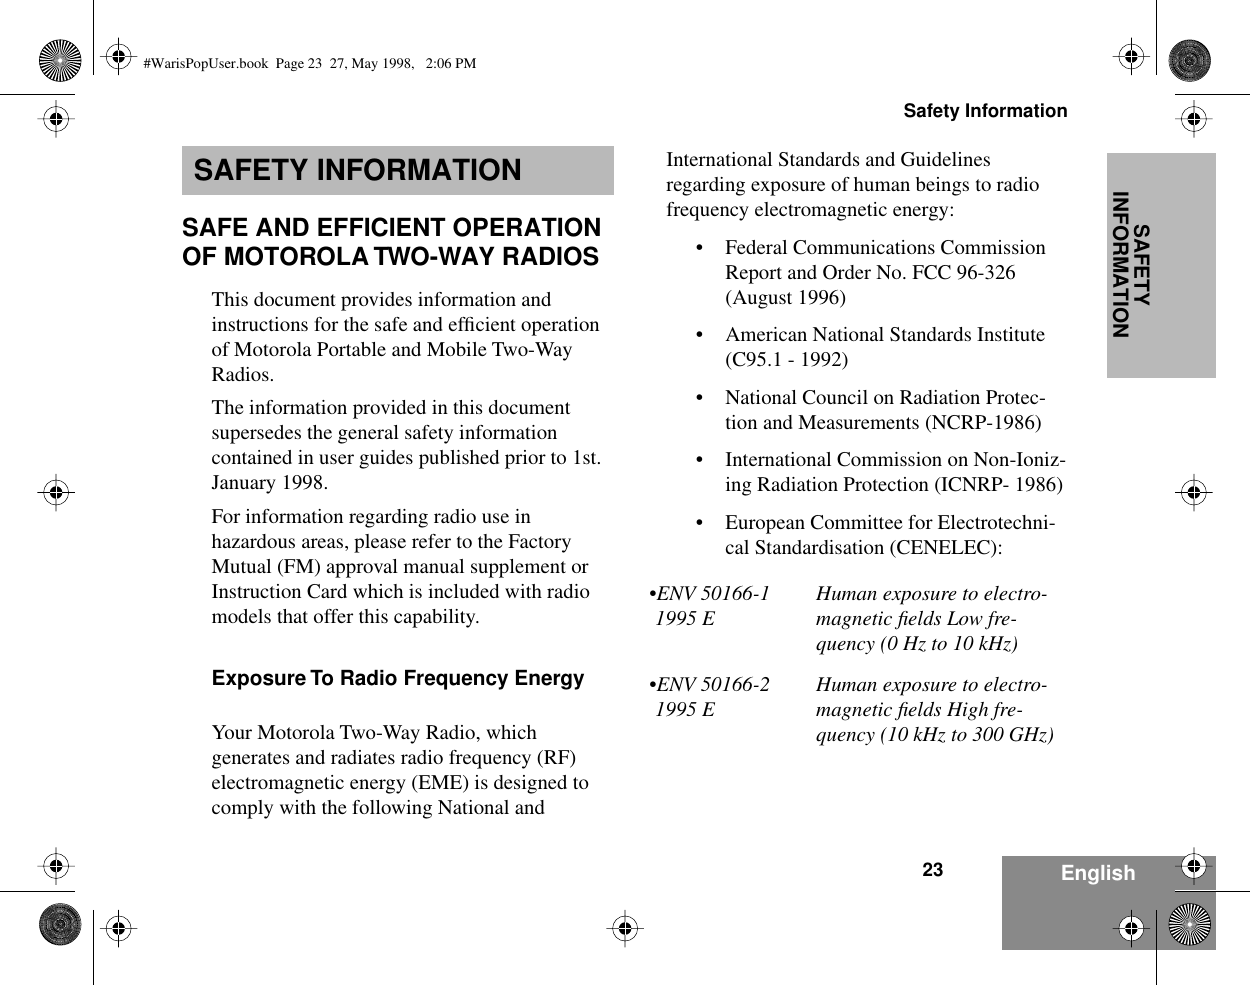 23Safety InformationEnglishSAFETY INFORMATIONSAFETY INFORMATIONSAFE AND EFFICIENT OPERATION OF MOTOROLA TWO-WAY RADIOSThis document provides information and instructions for the safe and efﬁcient operation of Motorola Portable and Mobile Two-Way Radios.The information provided in this document supersedes the general safety information contained in user guides published prior to 1st. January 1998. For information regarding radio use in hazardous areas, please refer to the Factory Mutual (FM) approval manual supplement or Instruction Card which is included with radio models that offer this capability.Exposure To Radio Frequency EnergyYour Motorola Two-Way Radio, which generates and radiates radio frequency (RF) electromagnetic energy (EME) is designed to comply with the following National and International Standards and Guidelines regarding exposure of human beings to radio frequency electromagnetic energy:• Federal Communications Commission Report and Order No. FCC 96-326 (August 1996)• American National Standards Institute (C95.1 - 1992)• National Council on Radiation Protec-tion and Measurements (NCRP-1986)• International Commission on Non-Ioniz-ing Radiation Protection (ICNRP- 1986)• European Committee for Electrotechni-cal Standardisation (CENELEC):•ENV 50166-1 1995 EHuman exposure to electro-magnetic ﬁelds Low fre-quency (0 Hz to 10 kHz) •ENV 50166-2 1995 EHuman exposure to electro-magnetic ﬁelds High fre-quency (10 kHz to 300 GHz)#WarisPopUser.book  Page 23  27, May 1998,   2:06 PM